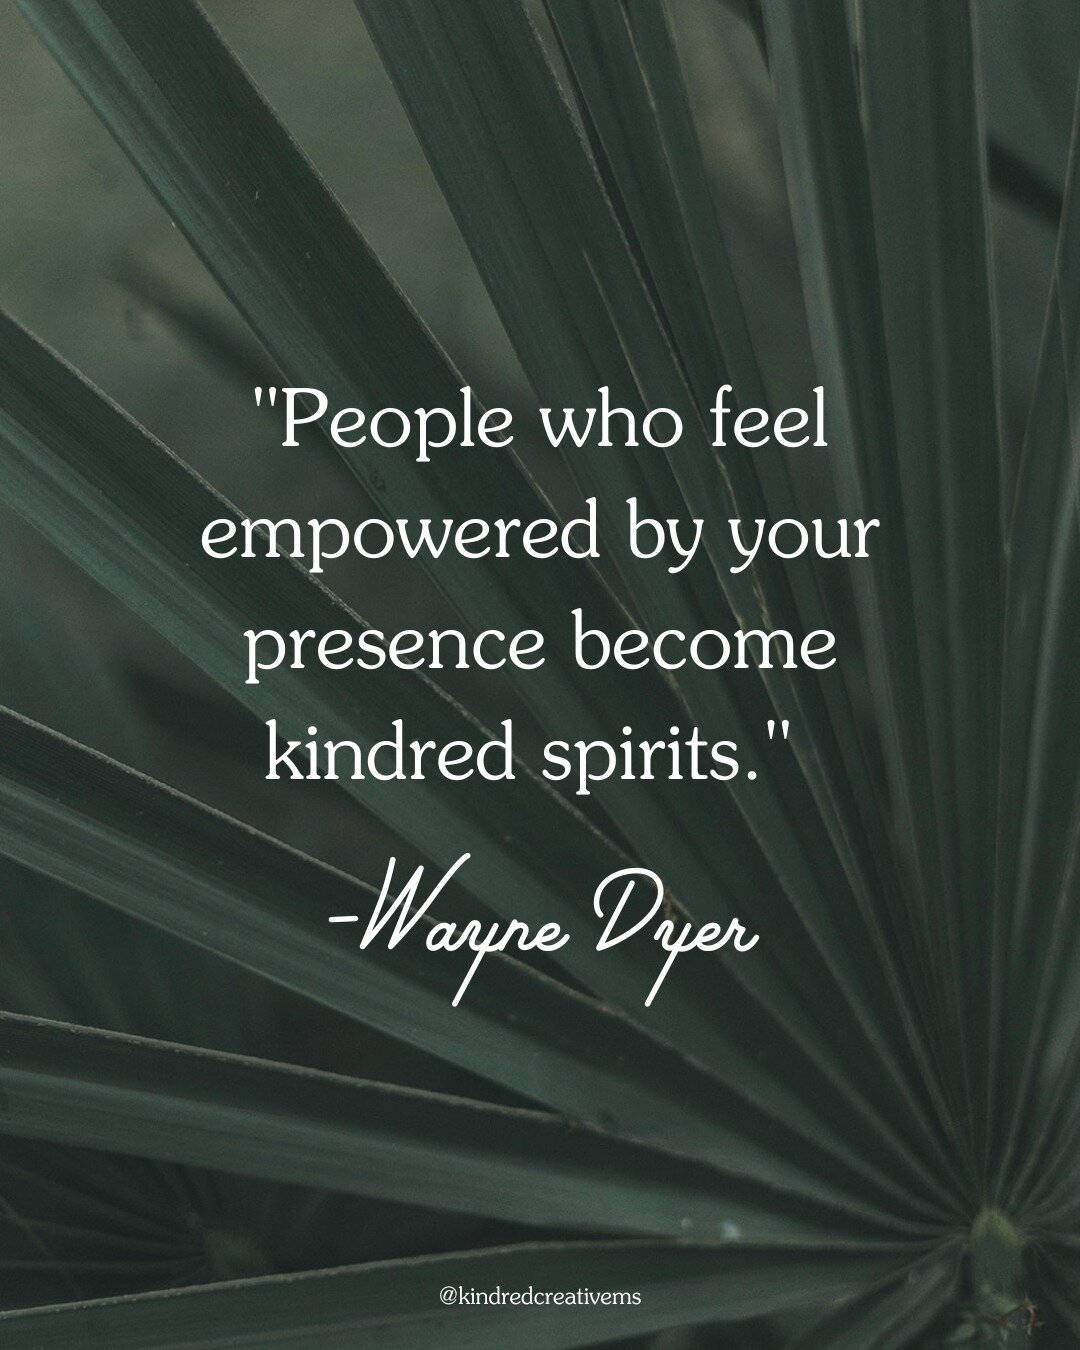 ☯ &quot;People who feel empowered by your presence become kindred spirits.&quot; ☯